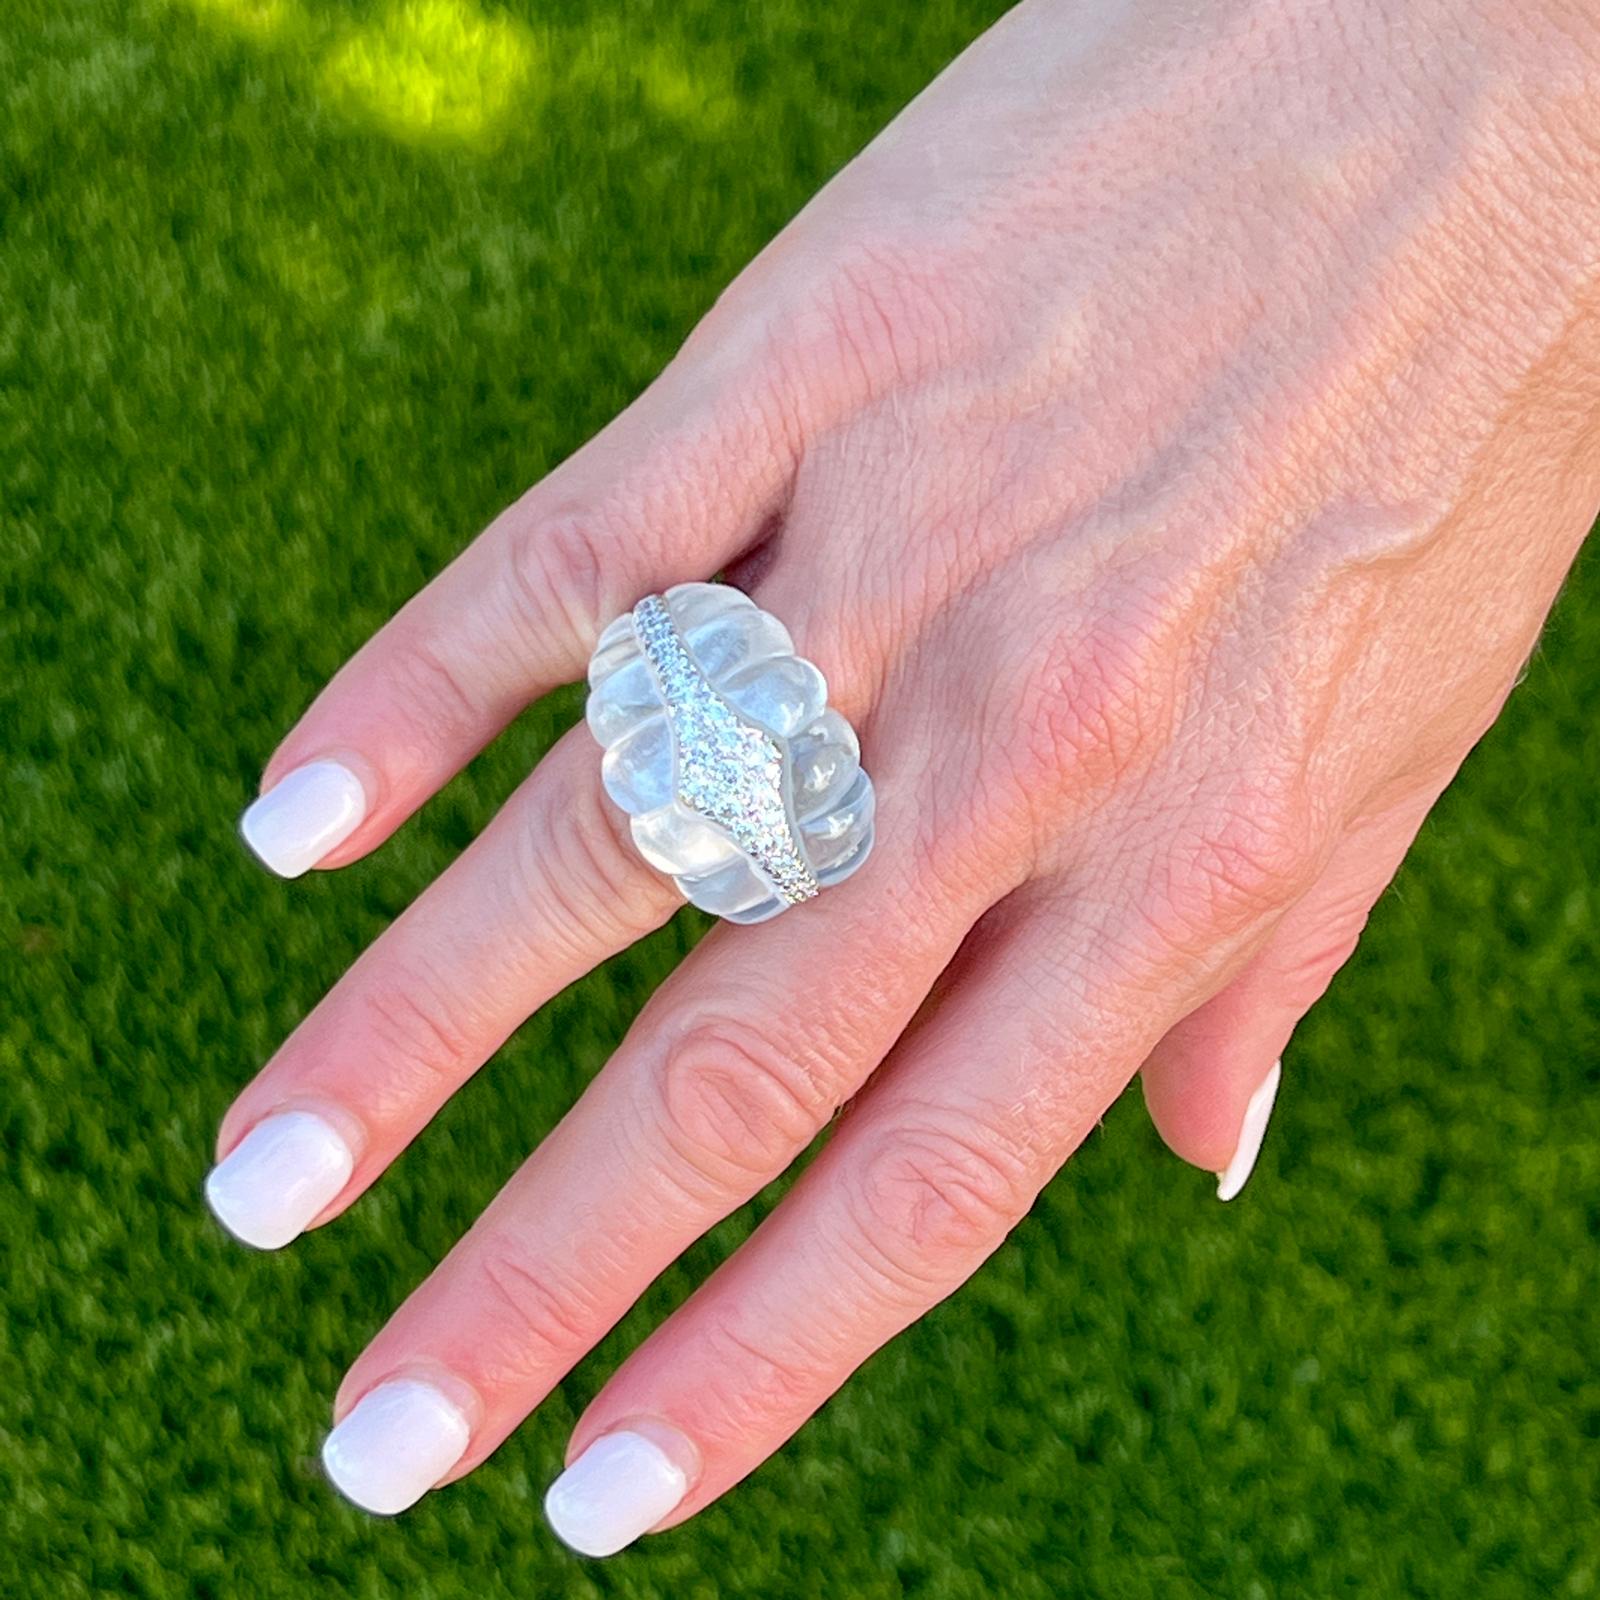 Fabulous David Webb diamond and rock crystal cocktail ring handcrafted in 18 karat white gold and platinum. The dome shape estate ring features carved rock crystal gemstone and round brilliant cut diamonds weighing approximately 1.20 carat total